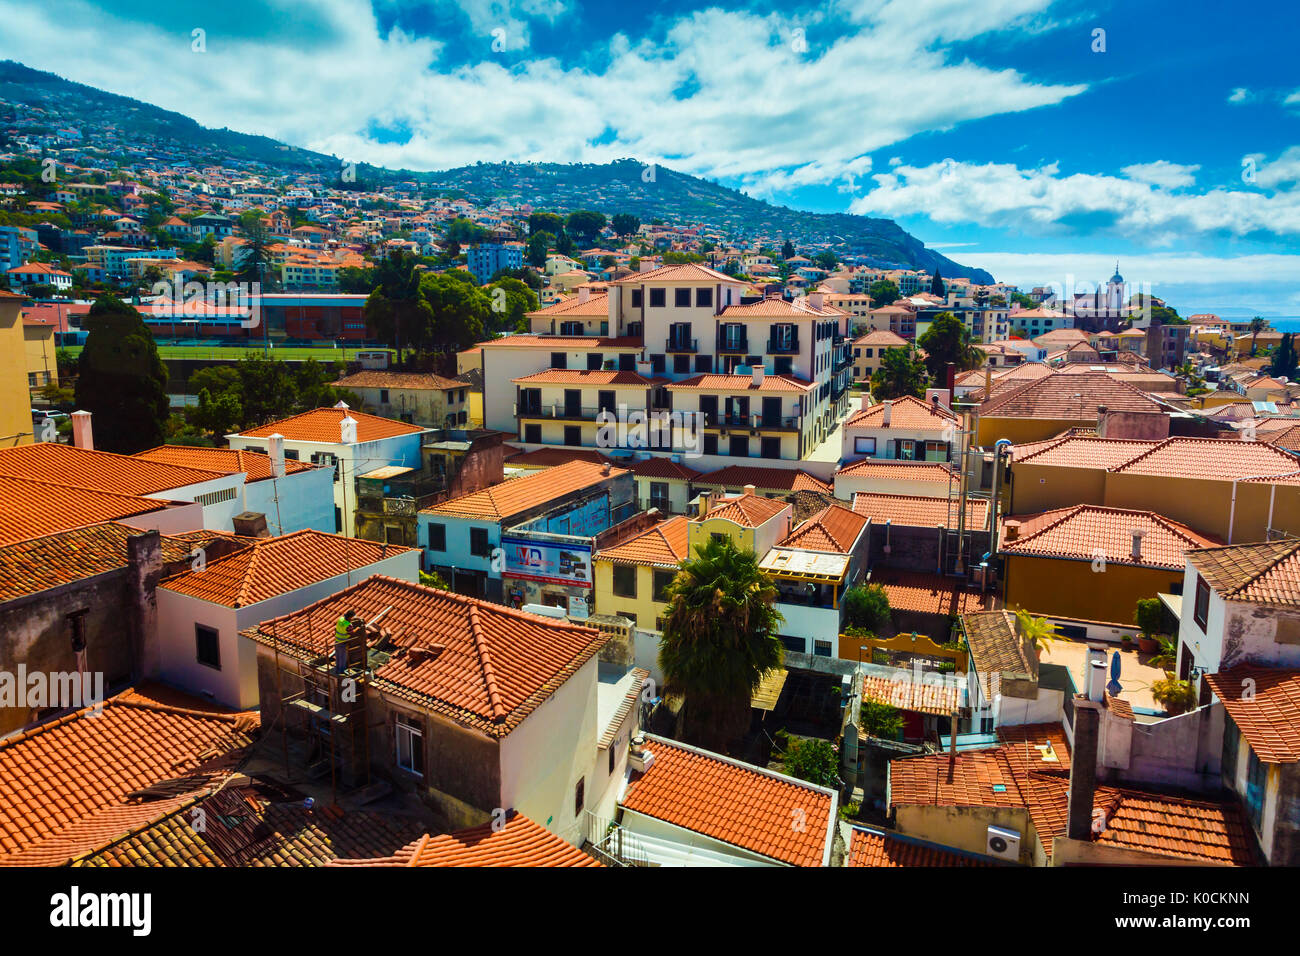 Cityscape. Funchal. Madeira, Portugal, Europe. Stock Photo